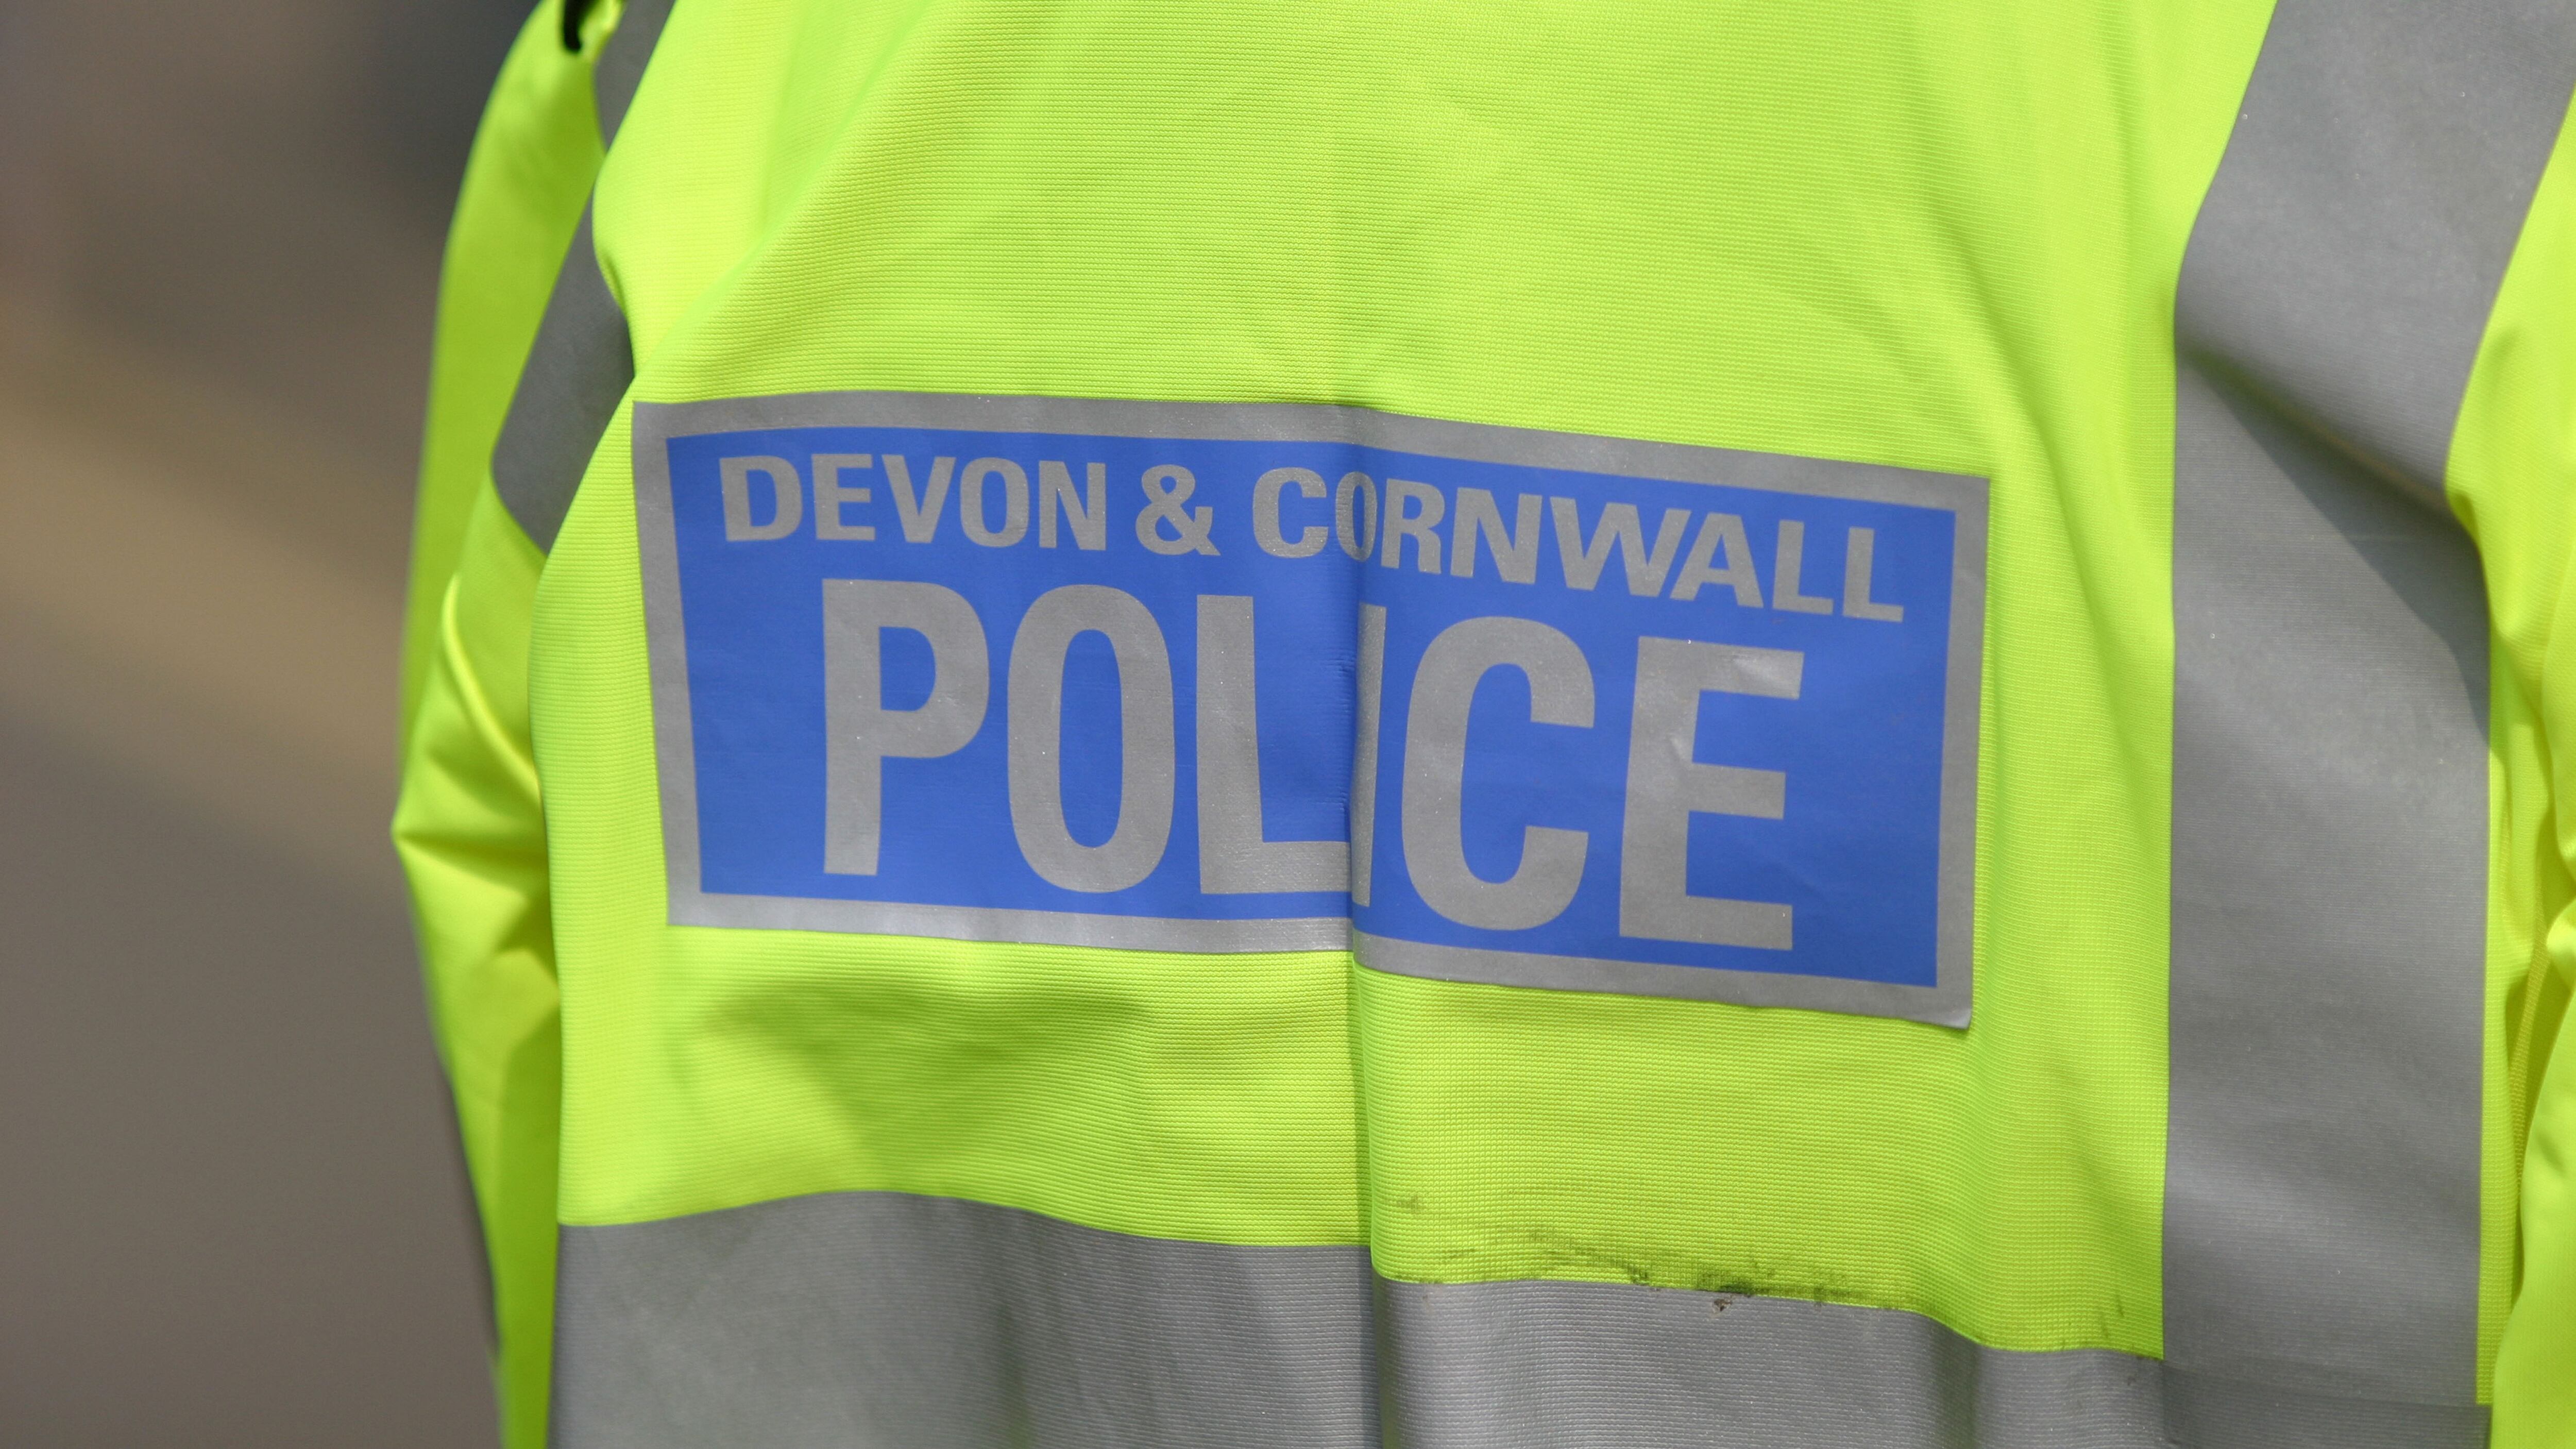 Devon and Cornwall Police said four people were arrested after an ‘unusually strong batch’ of heroin circulated across North Devon